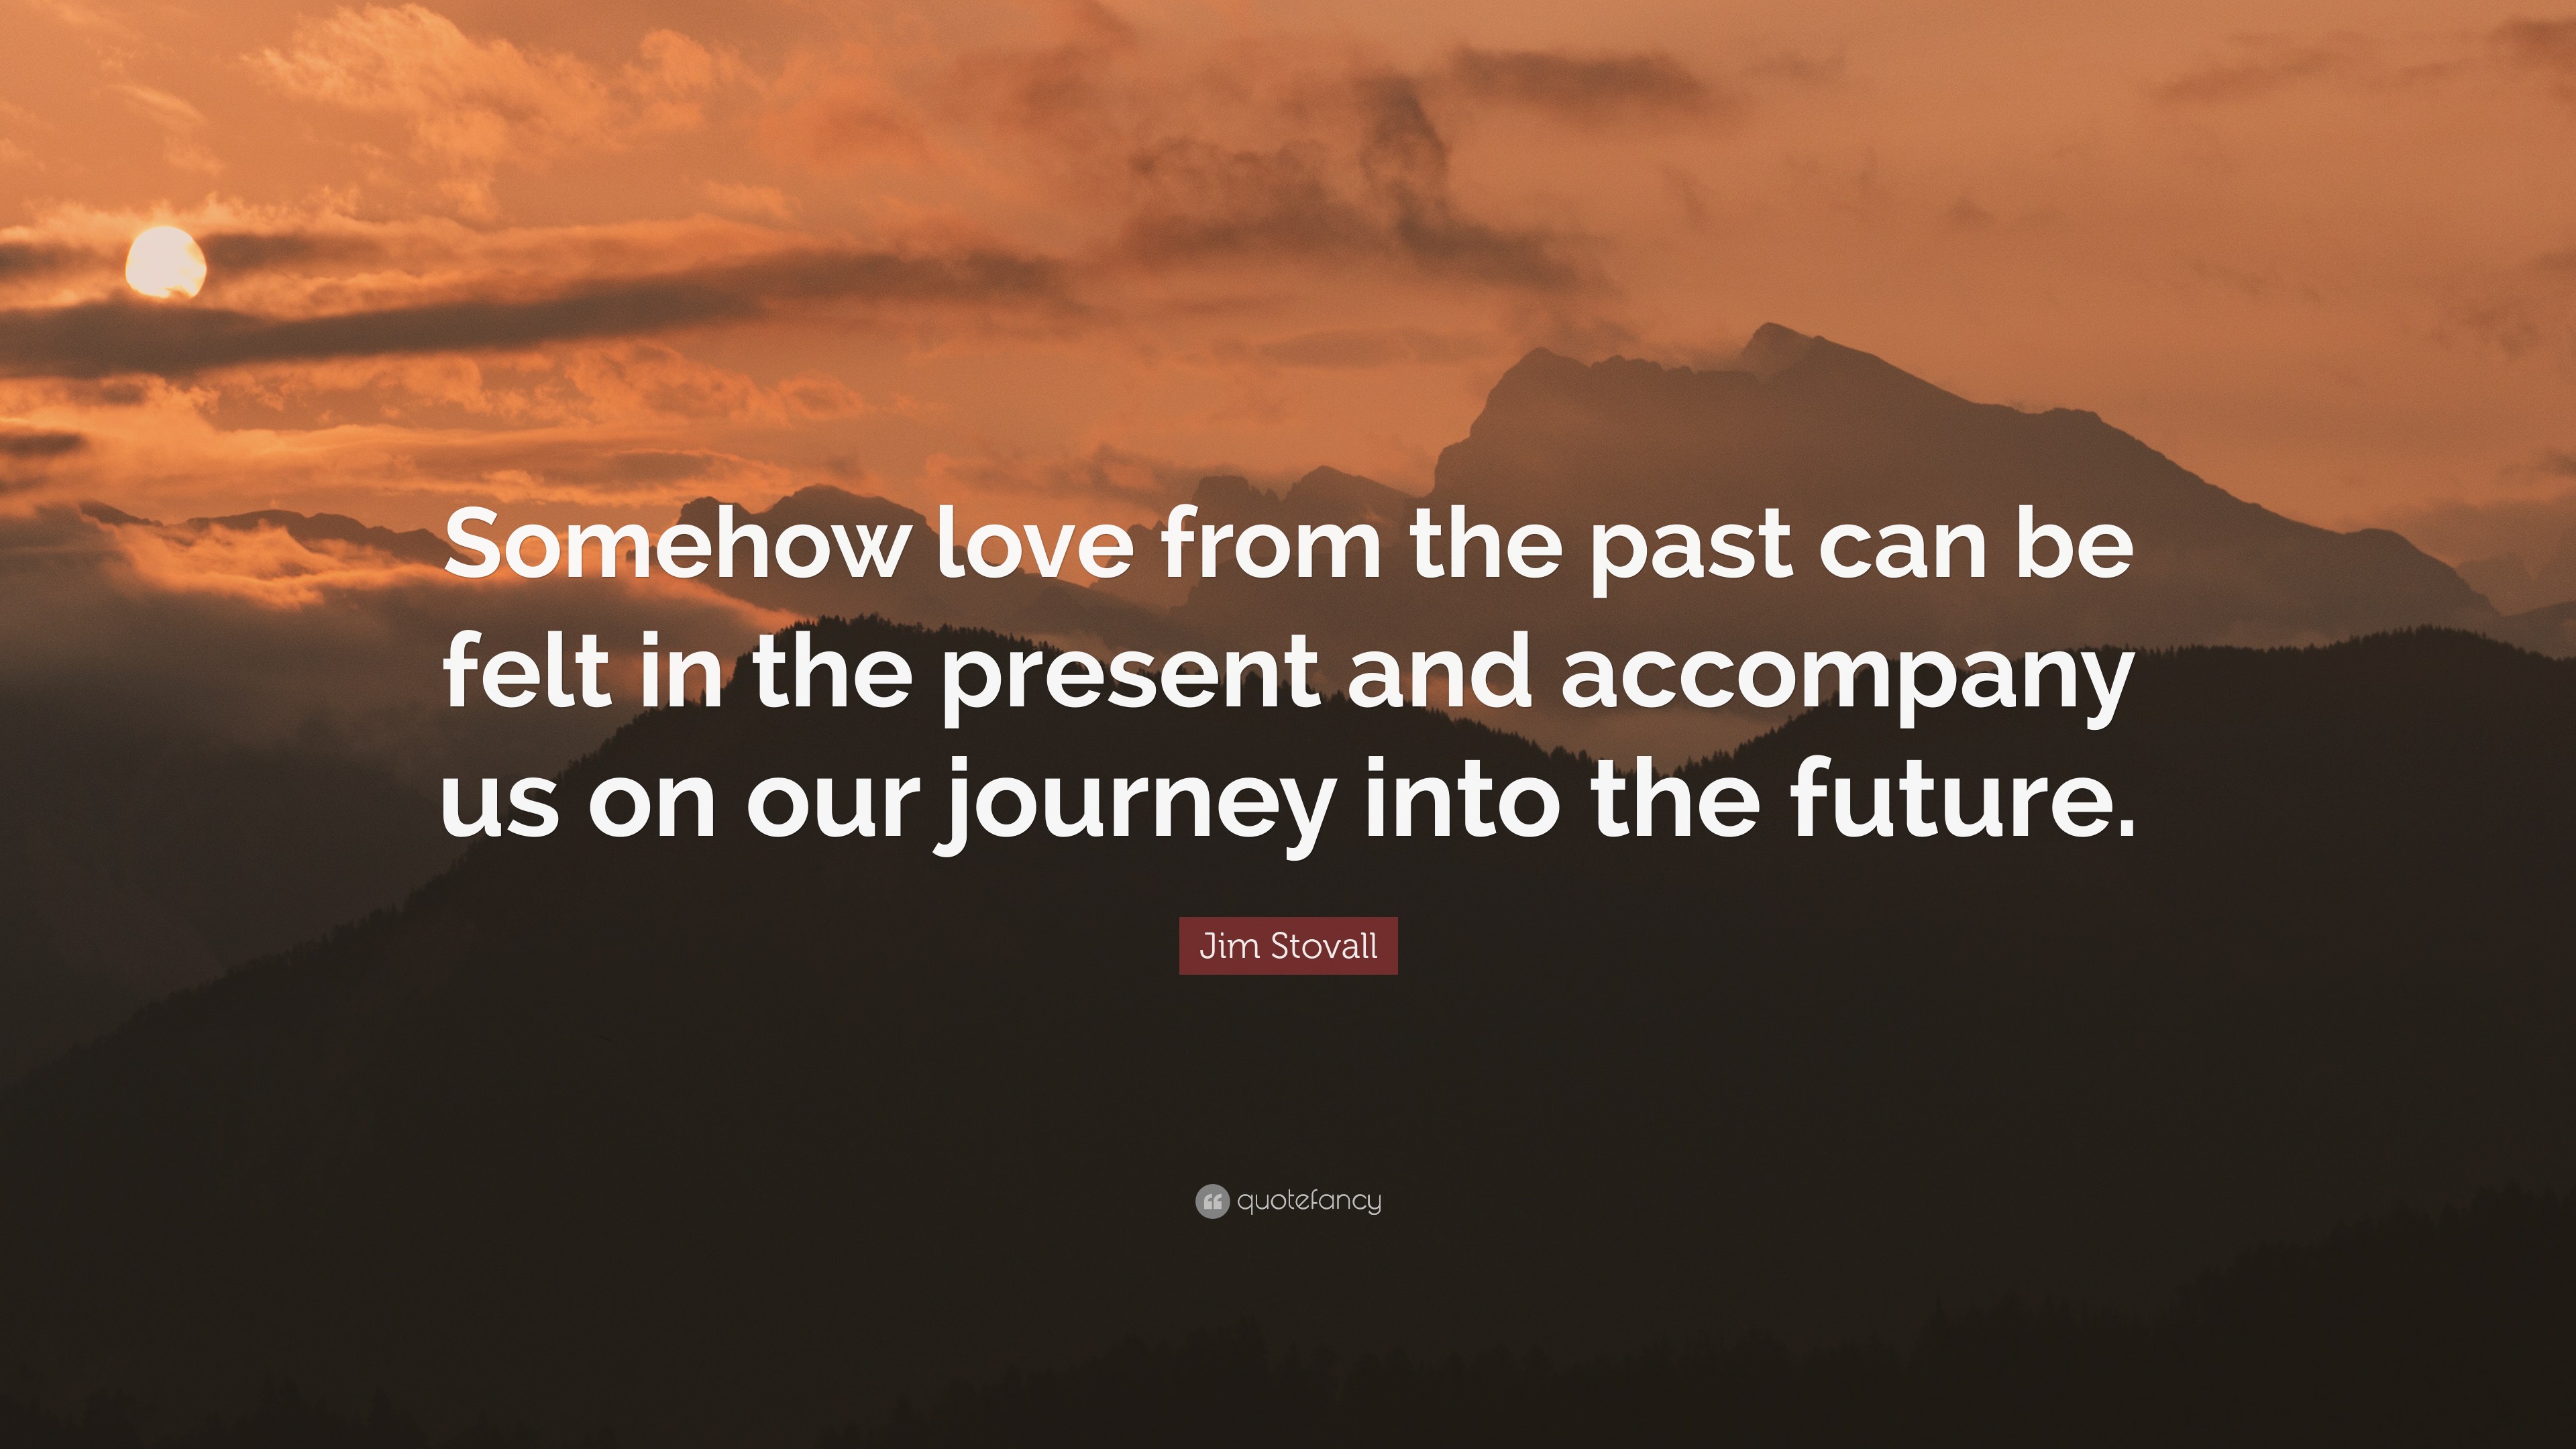 Jim Stovall Quote: “Somehow love from the past can be felt in the ...